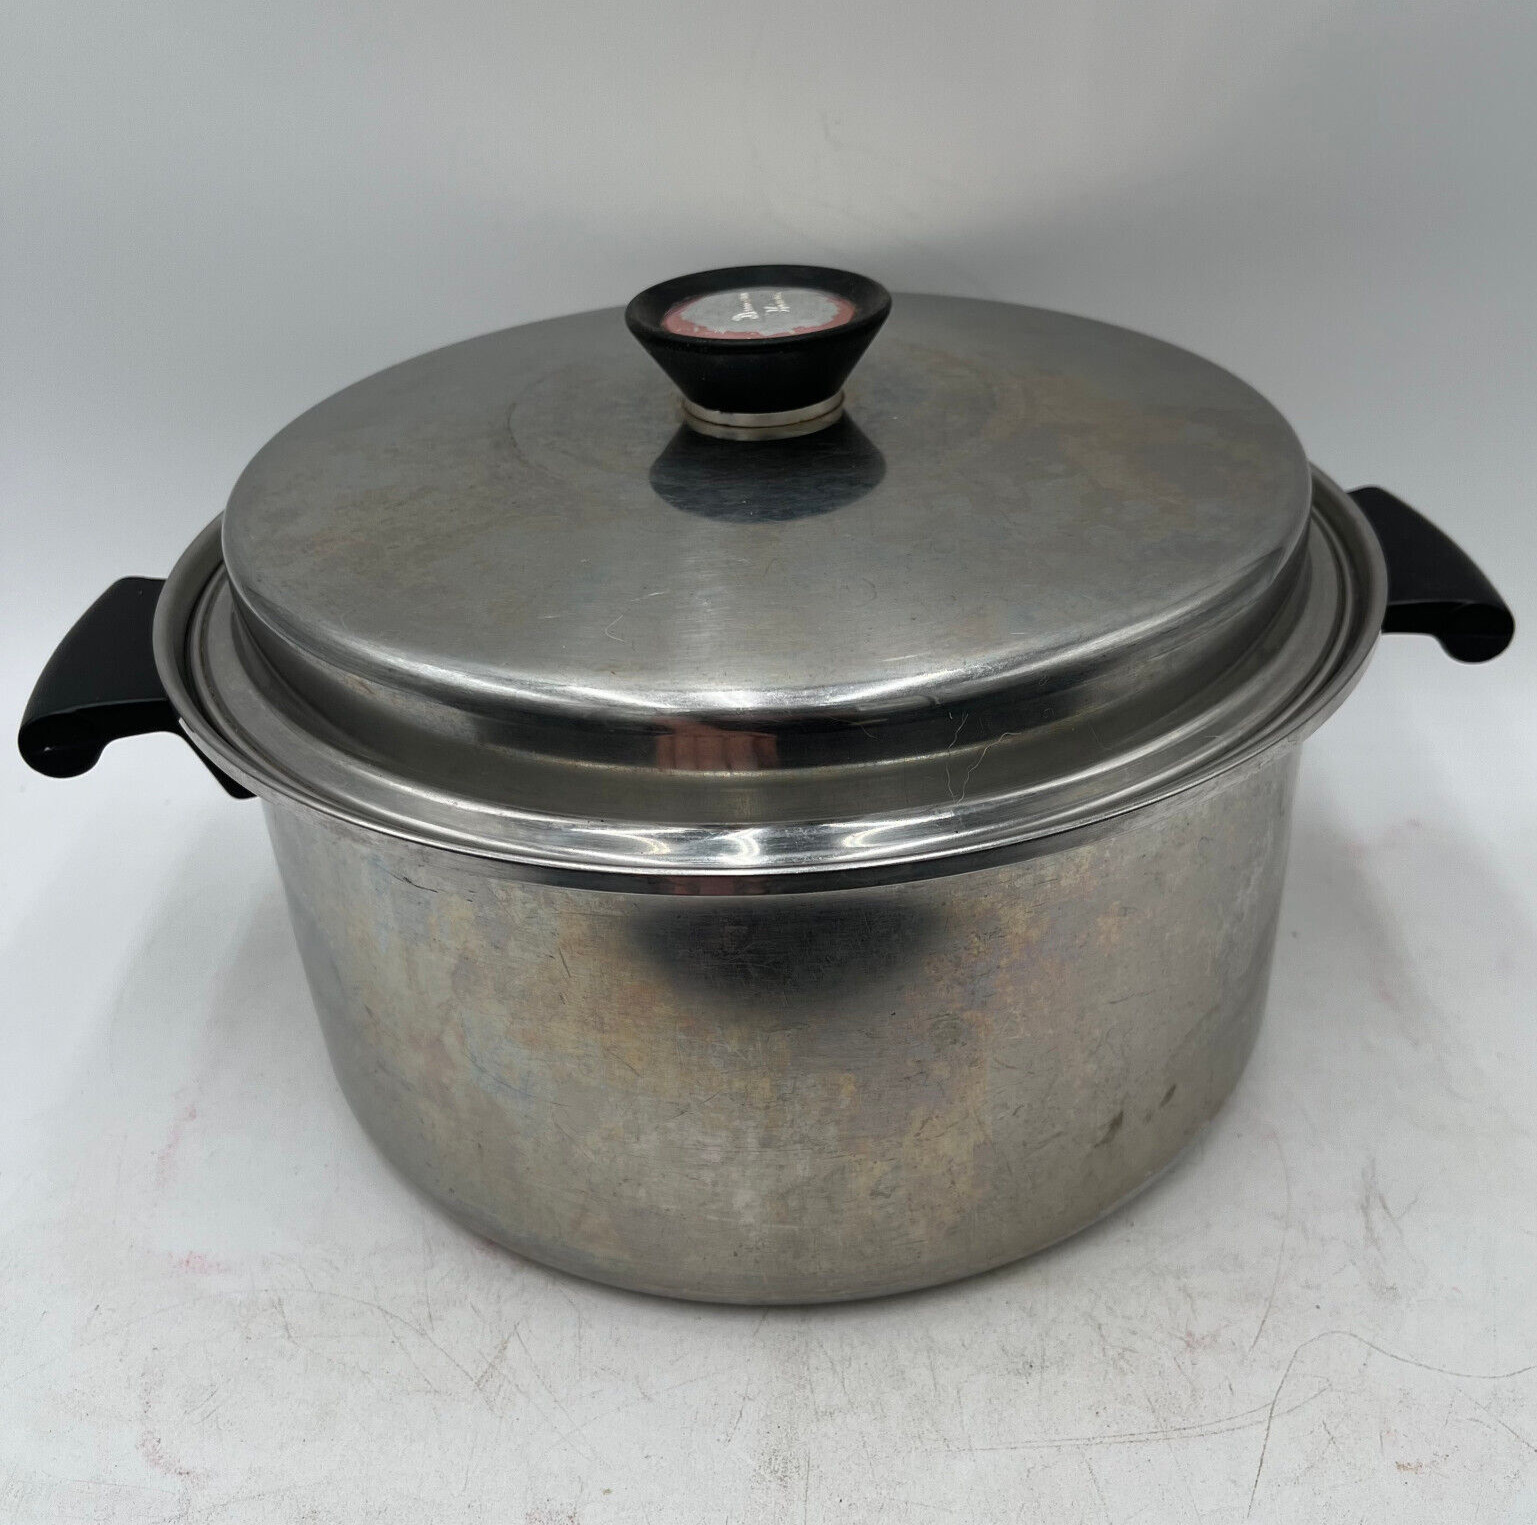 Vintage Duncan Hines Stainless Steel Cookware 5 Quart Pan Pot with Lid 3 handles